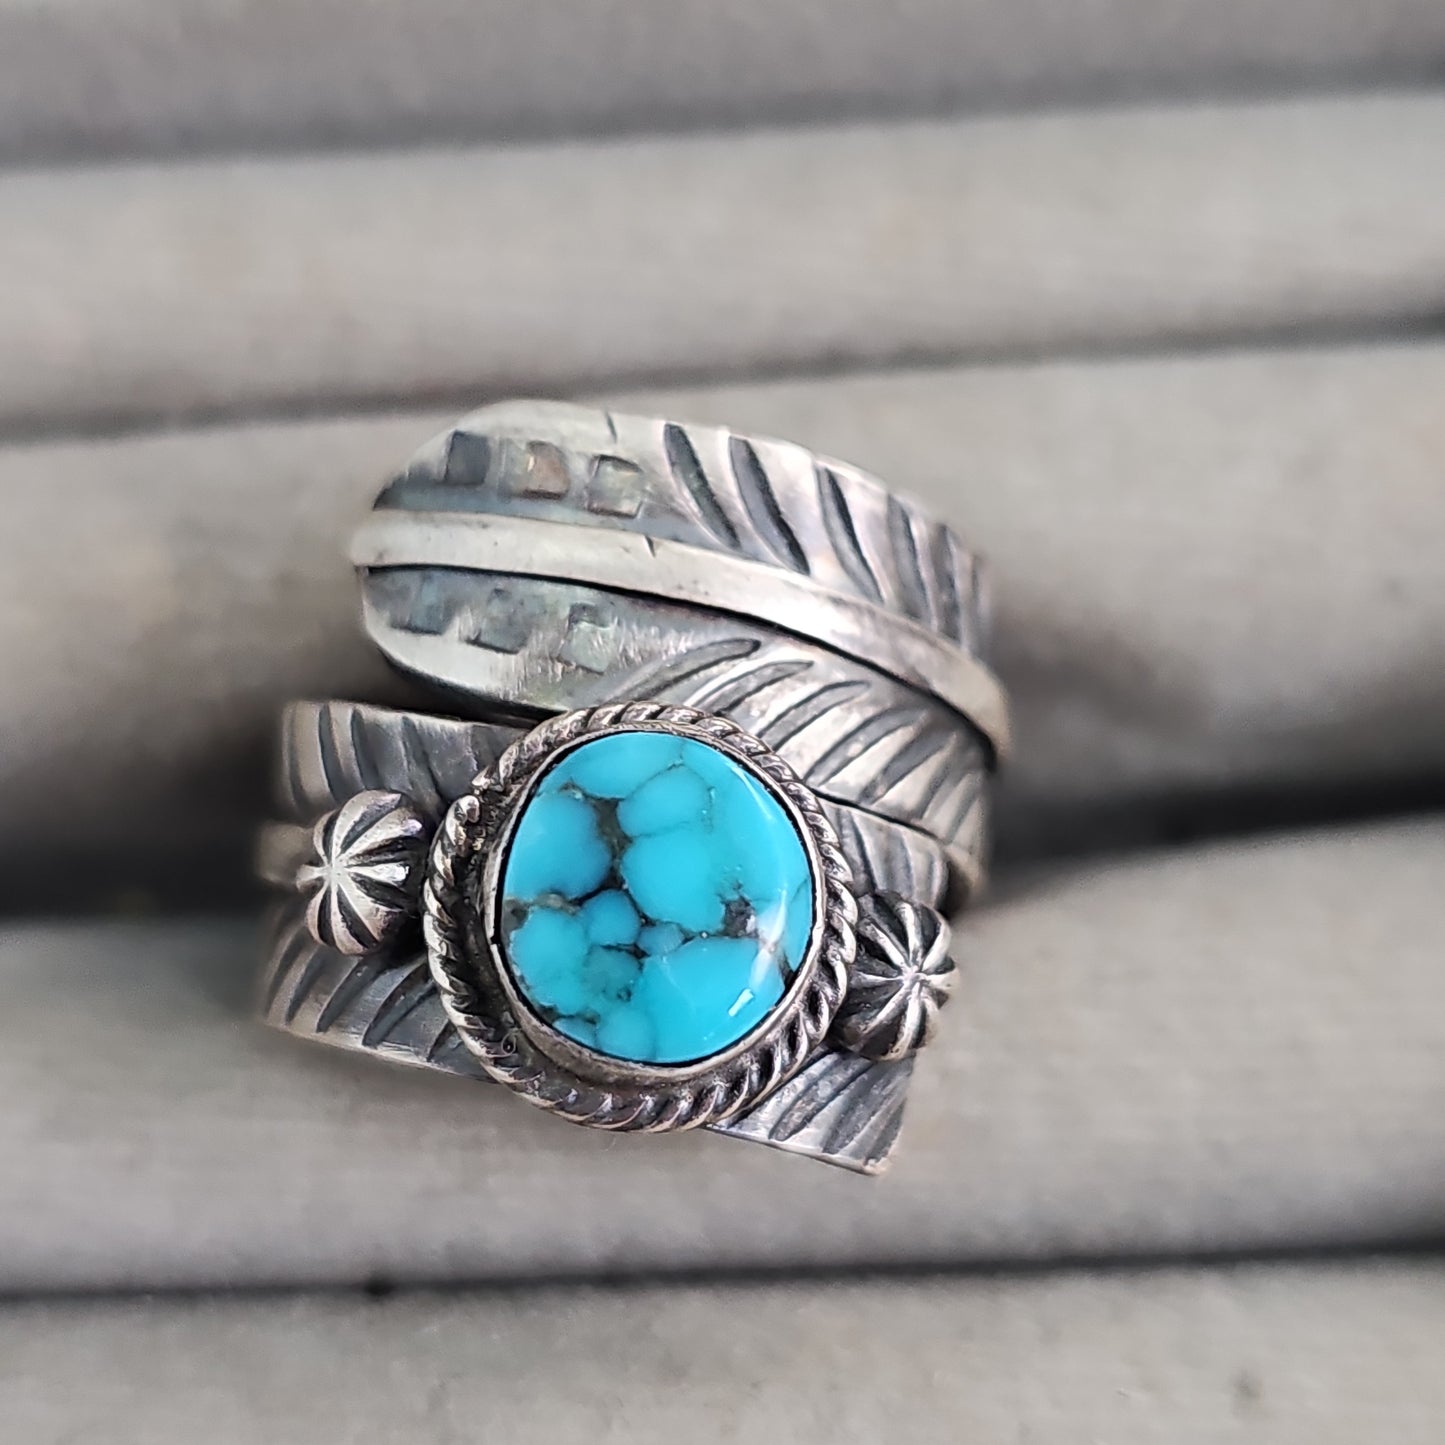 Heavy feather ring